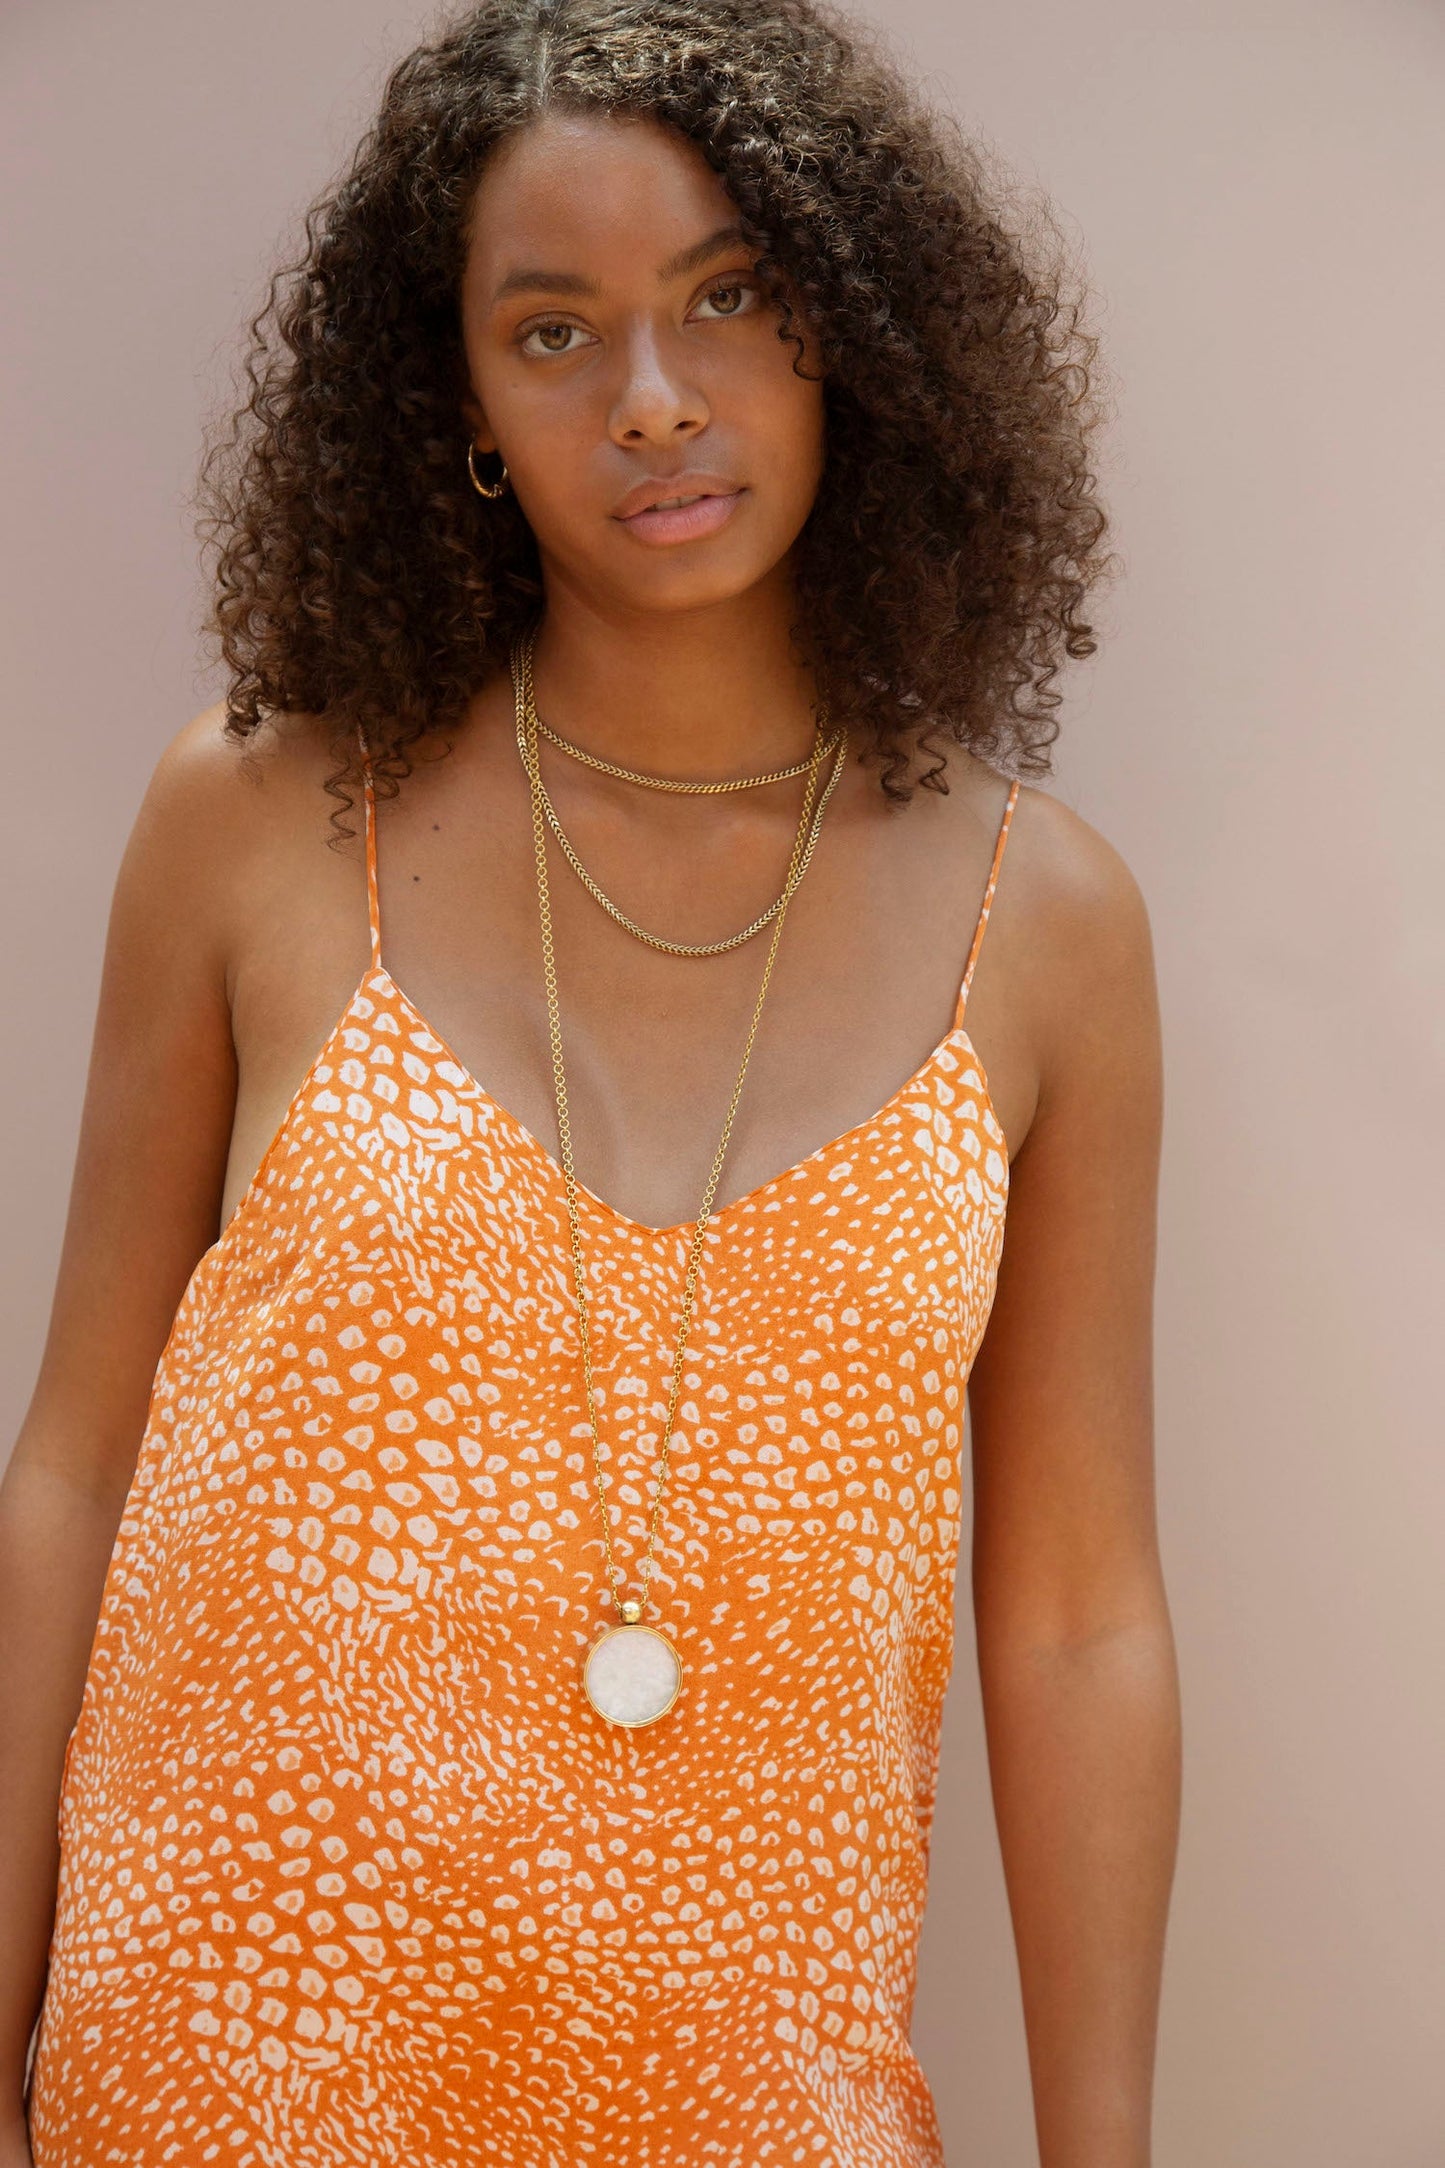 Load image into Gallery viewer, In Stock - Orange Sienna Dress
